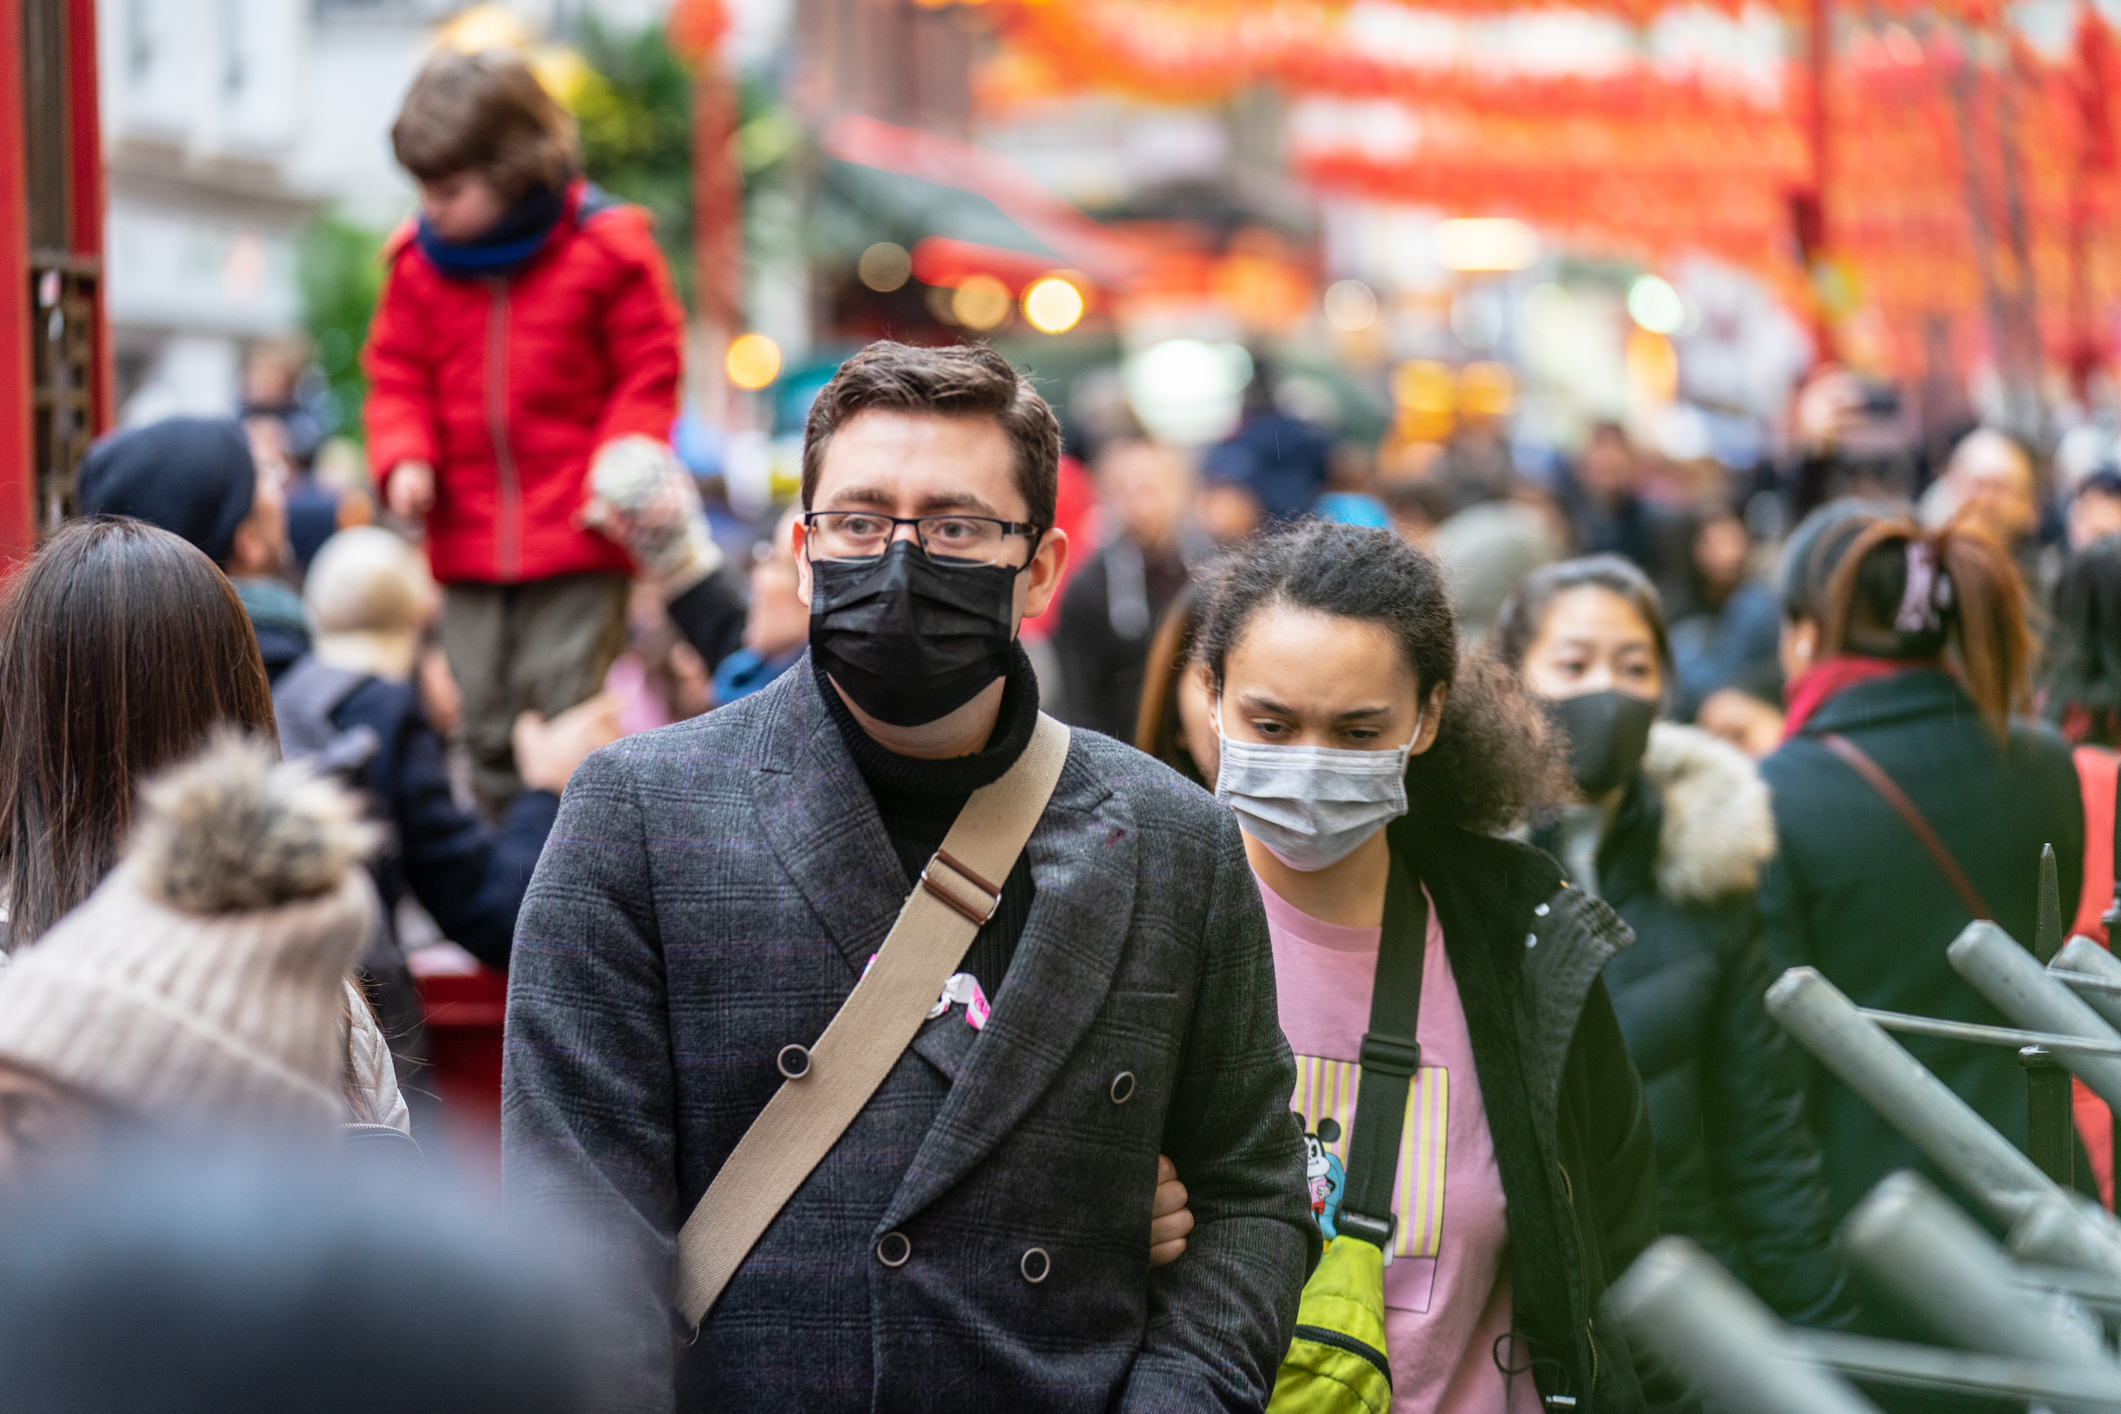 Groups of people walk in a crowd wearing masks but not social distancing.